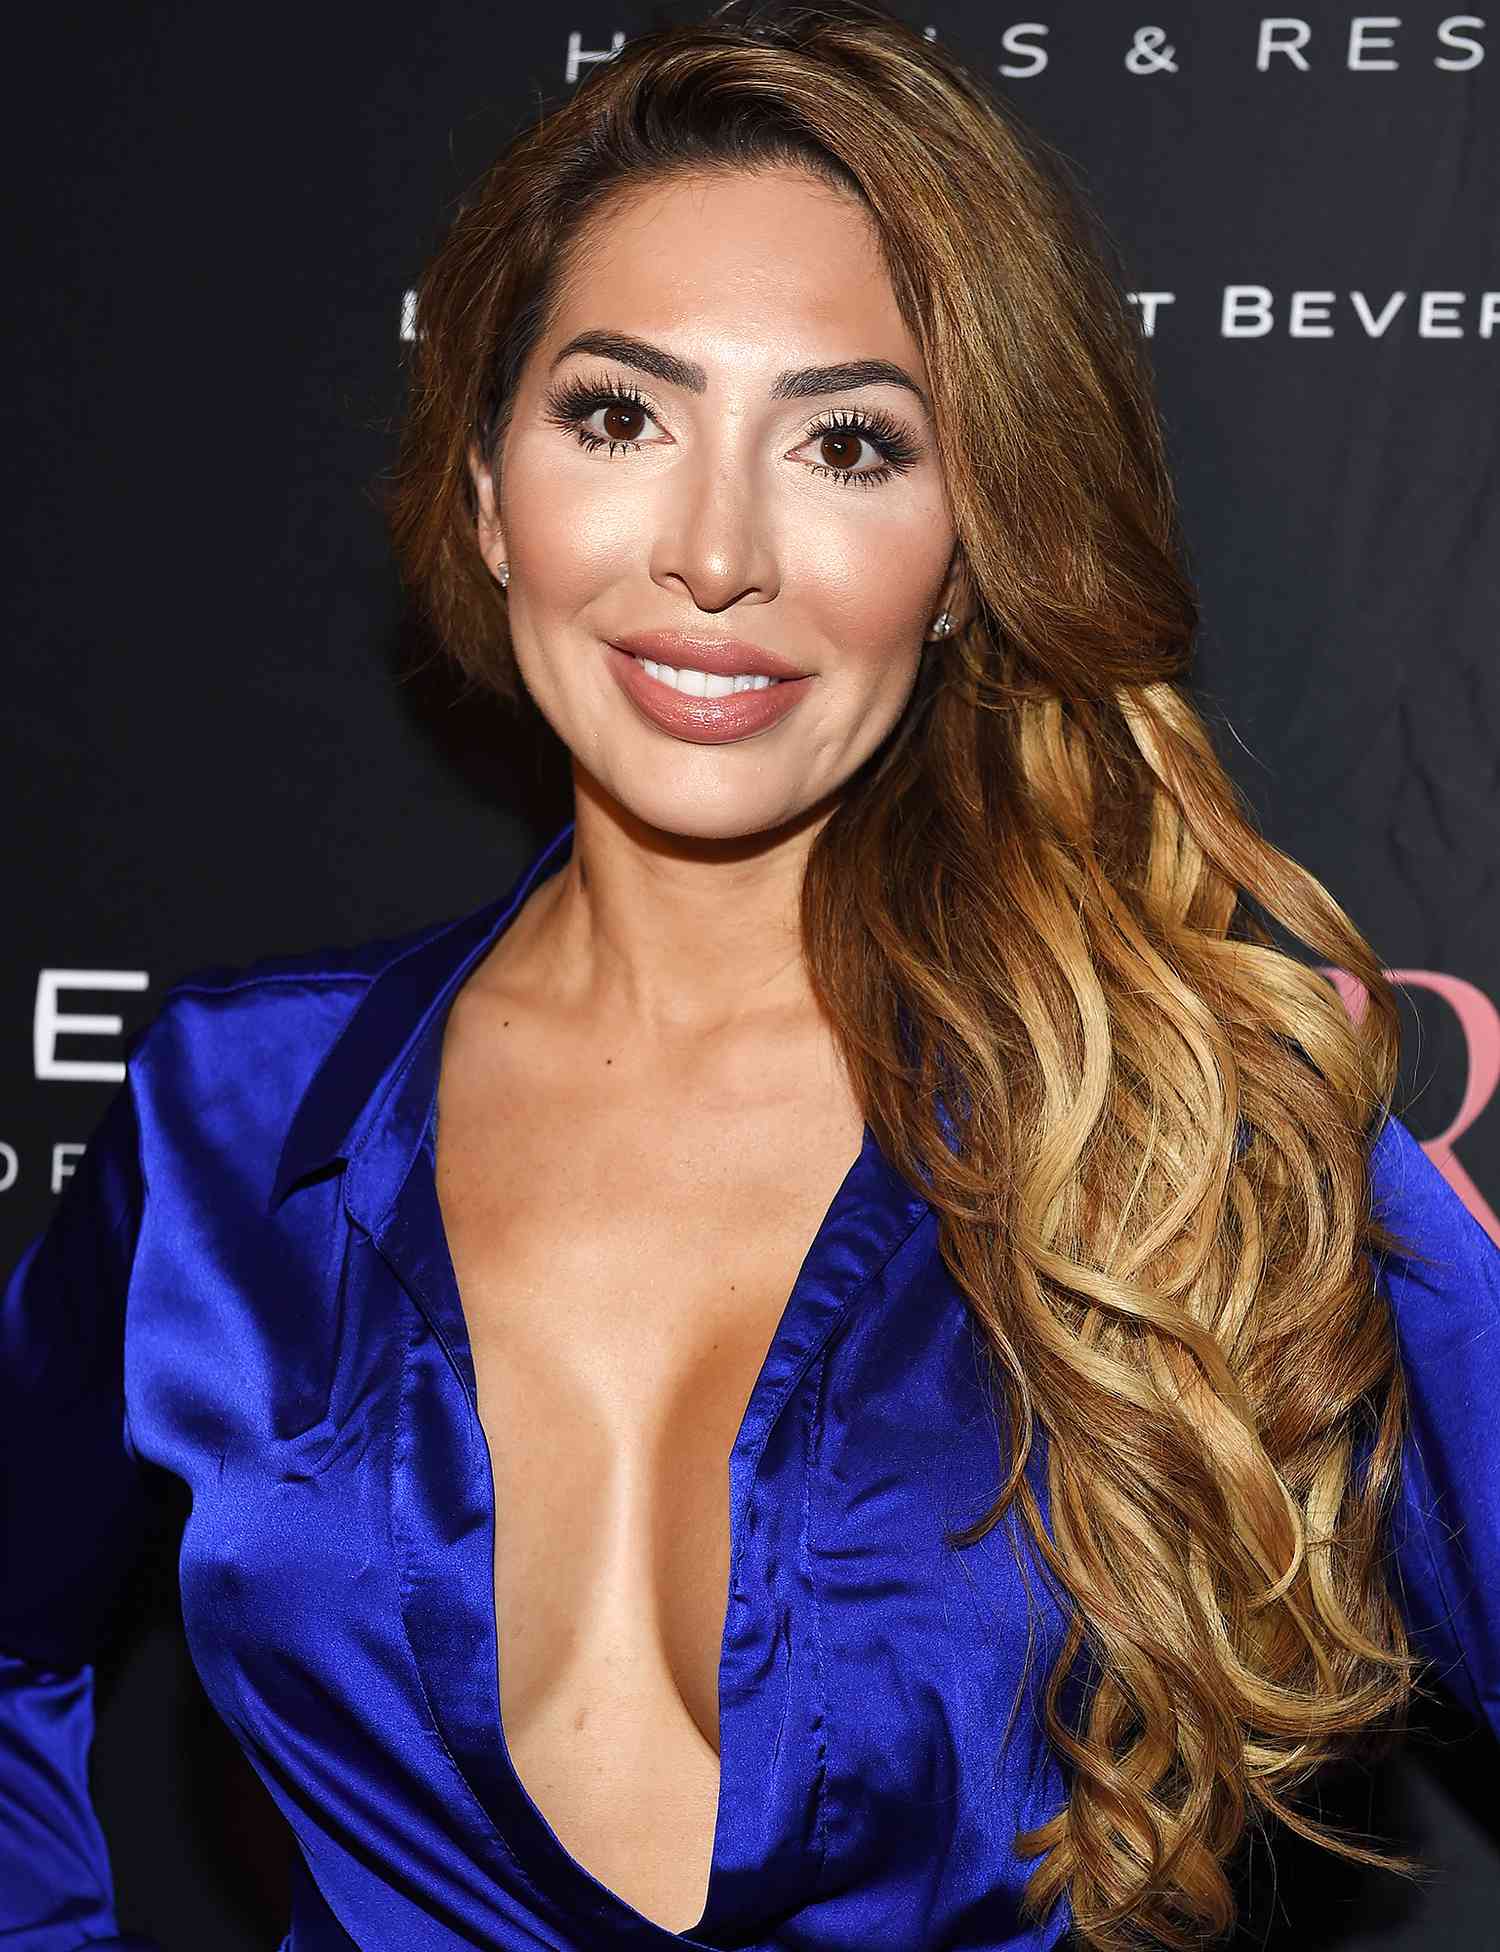 Farrah Abraham Arrested After Slapping Security Guard at L.A. Eatery |  PEOPLE.com